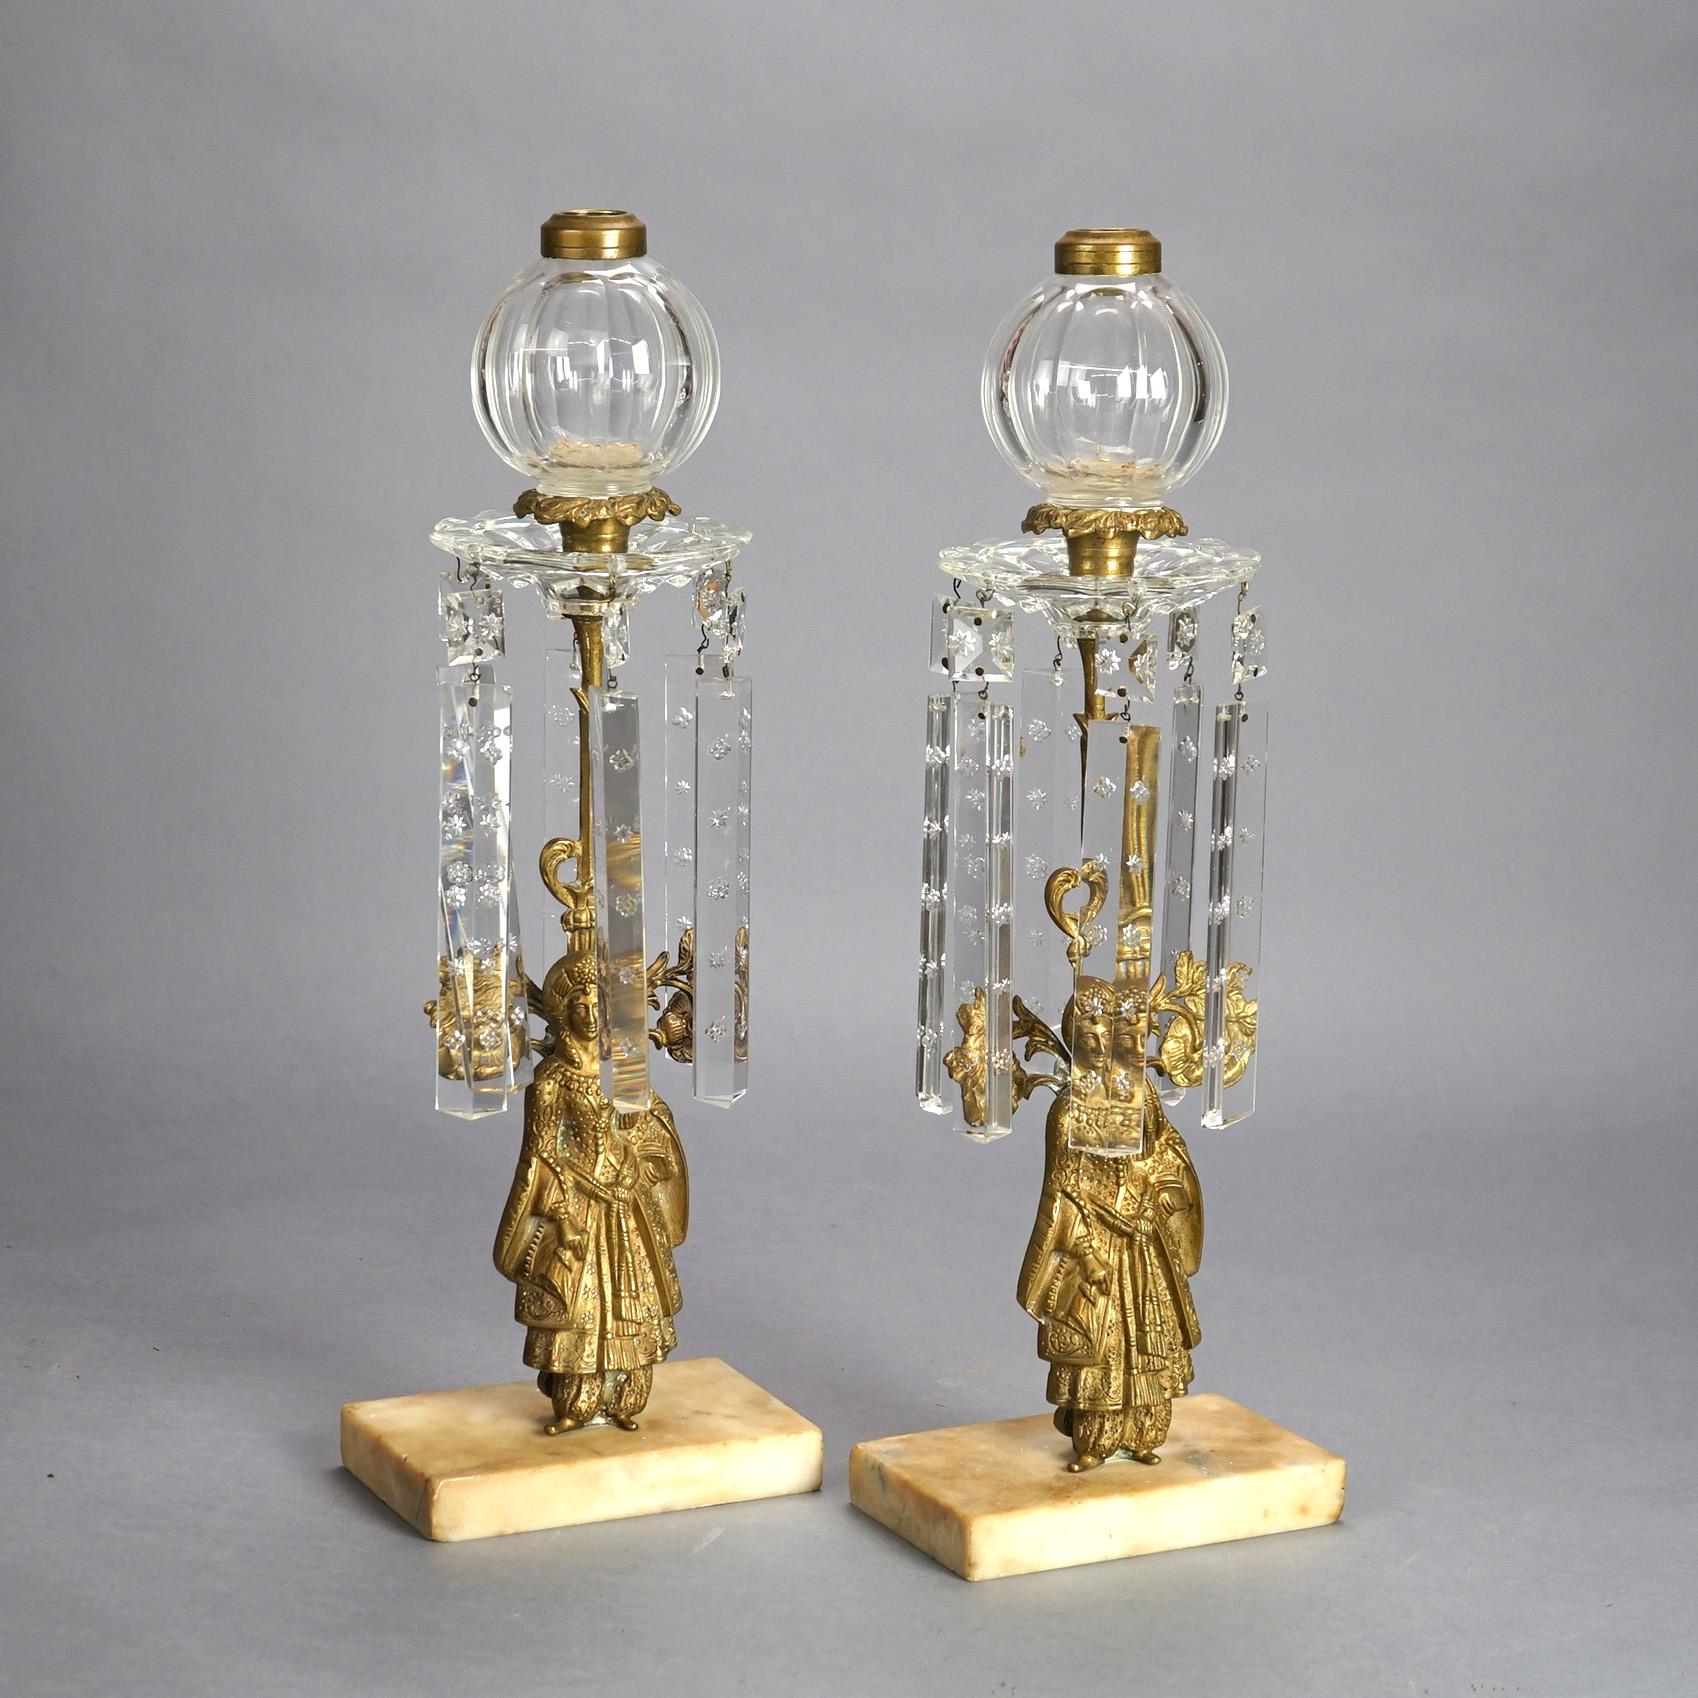 Antique Pair Figural Girandole Sultana Design Oil Lamps with Crystals C1880 In Good Condition For Sale In Big Flats, NY